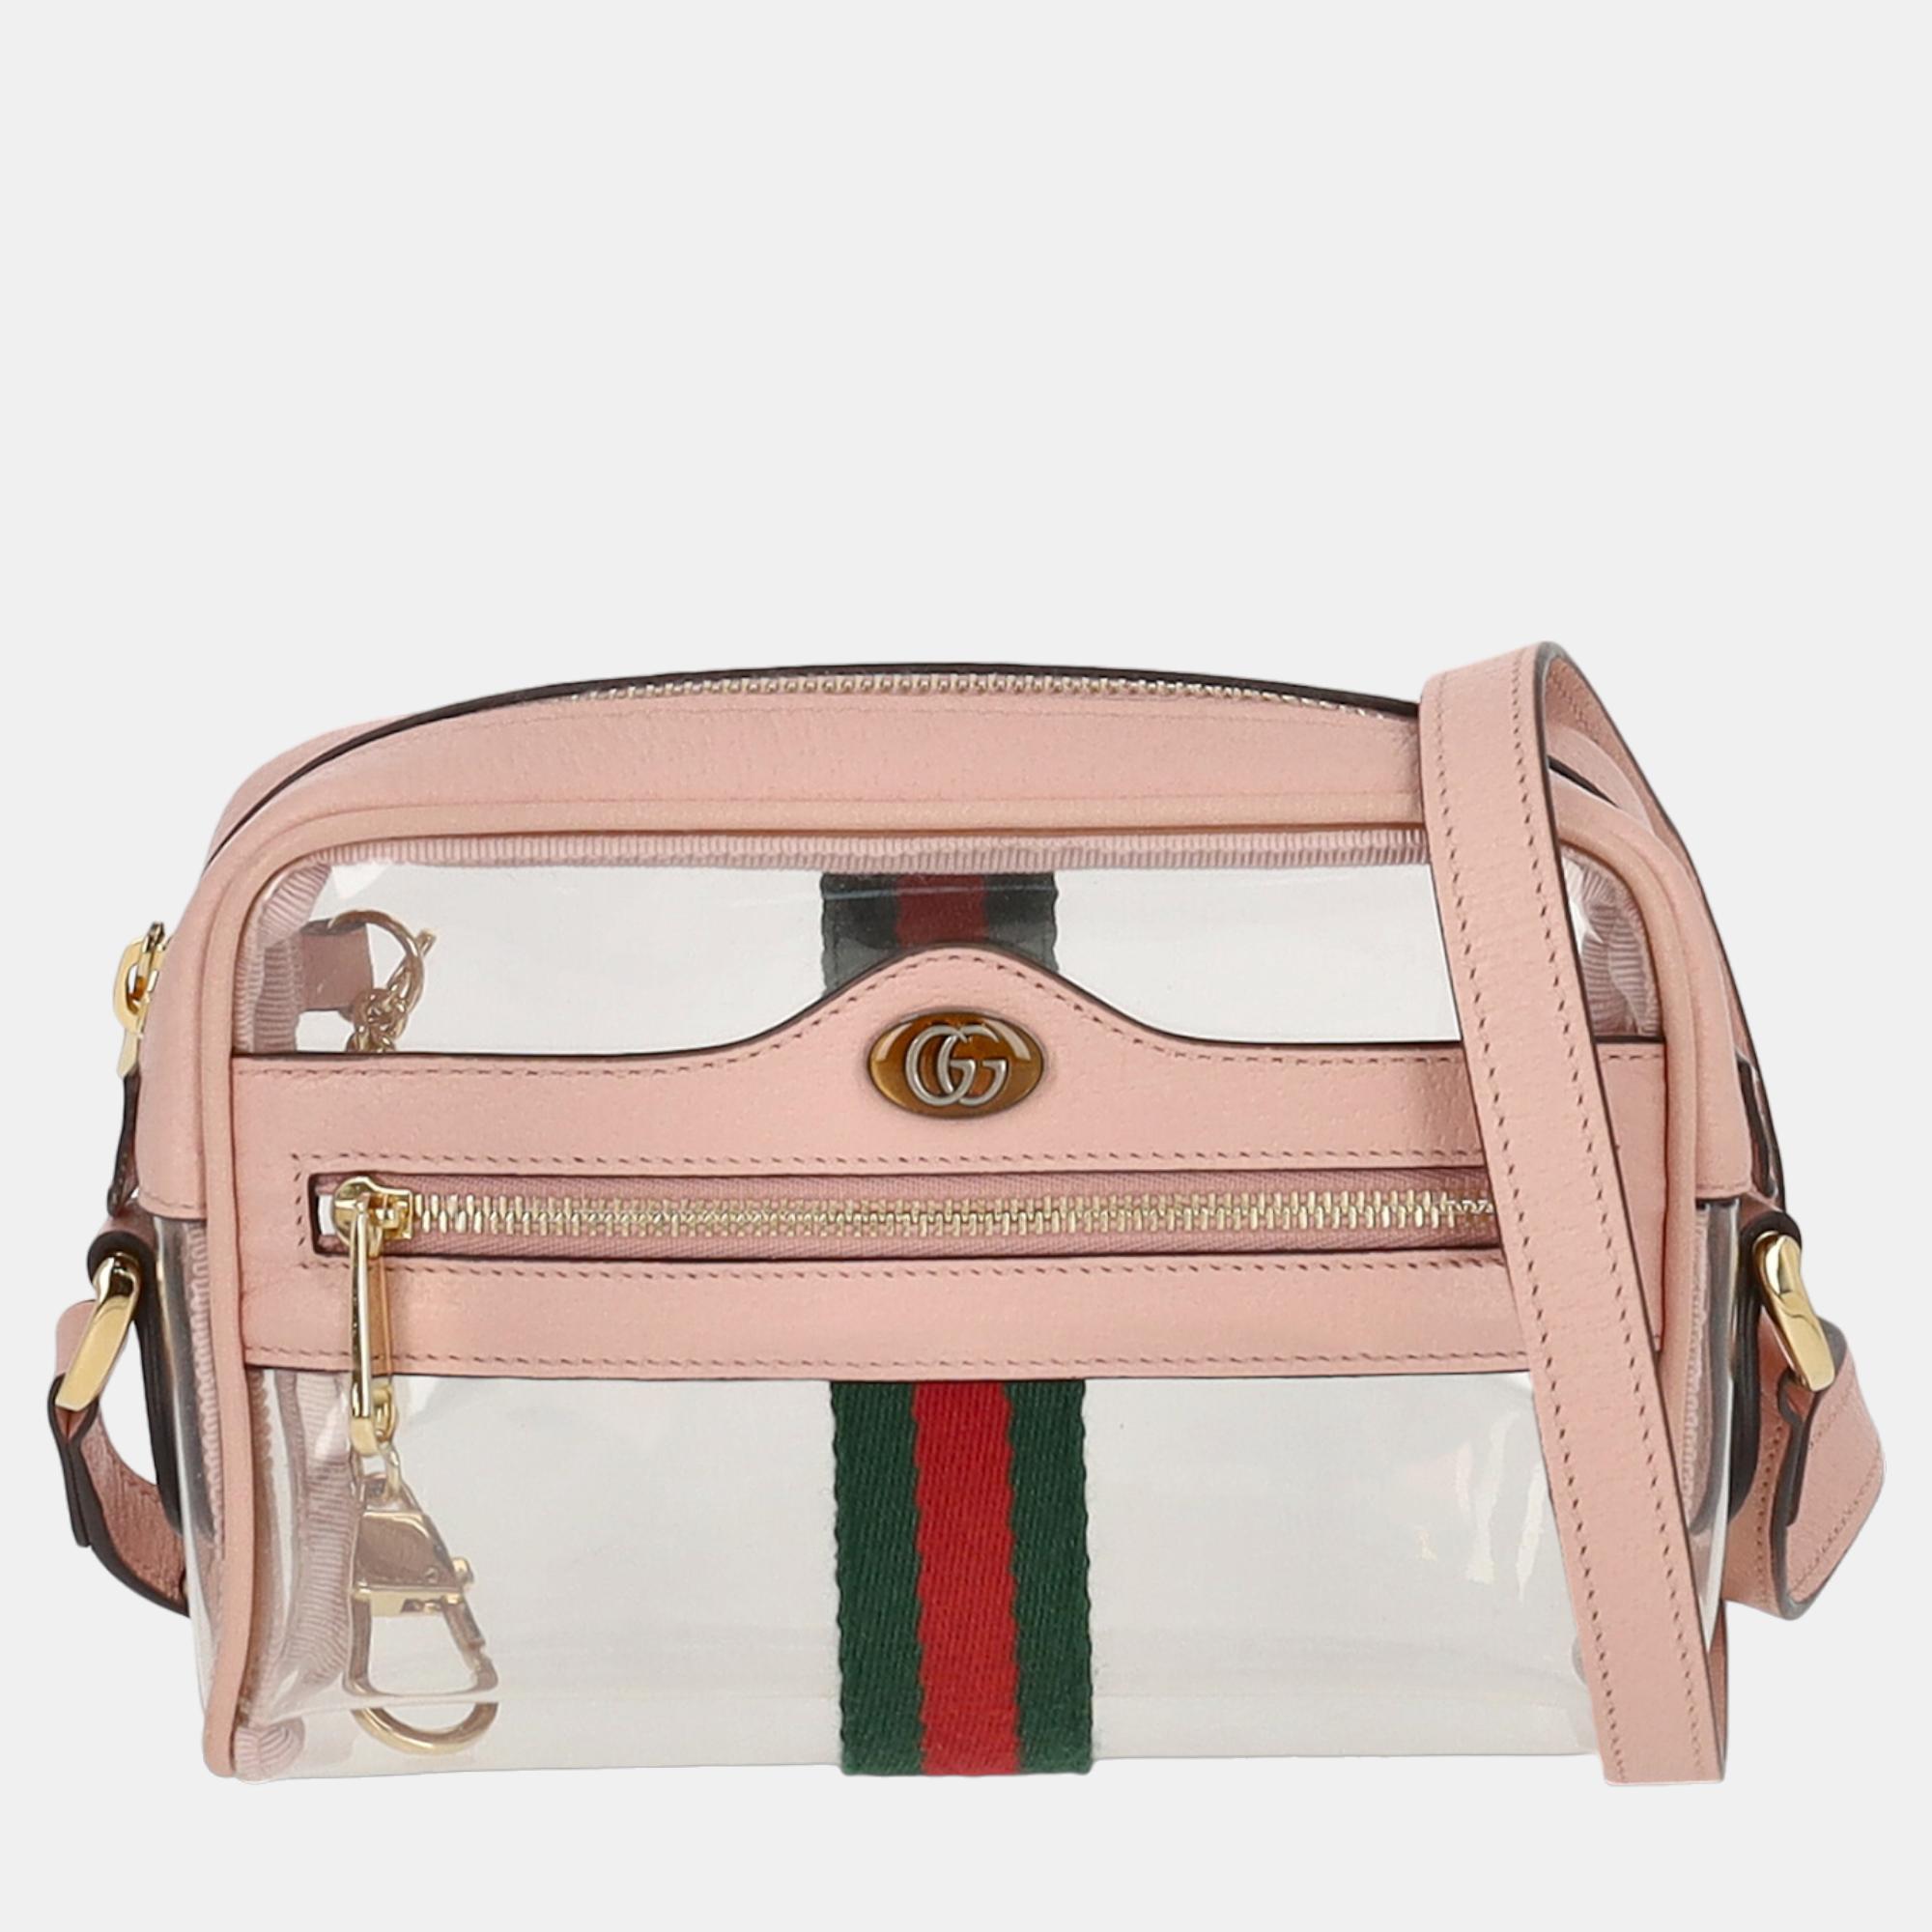 Gucci Ophidia -  Women's Leather Cross Body Bag - Pink - One Size